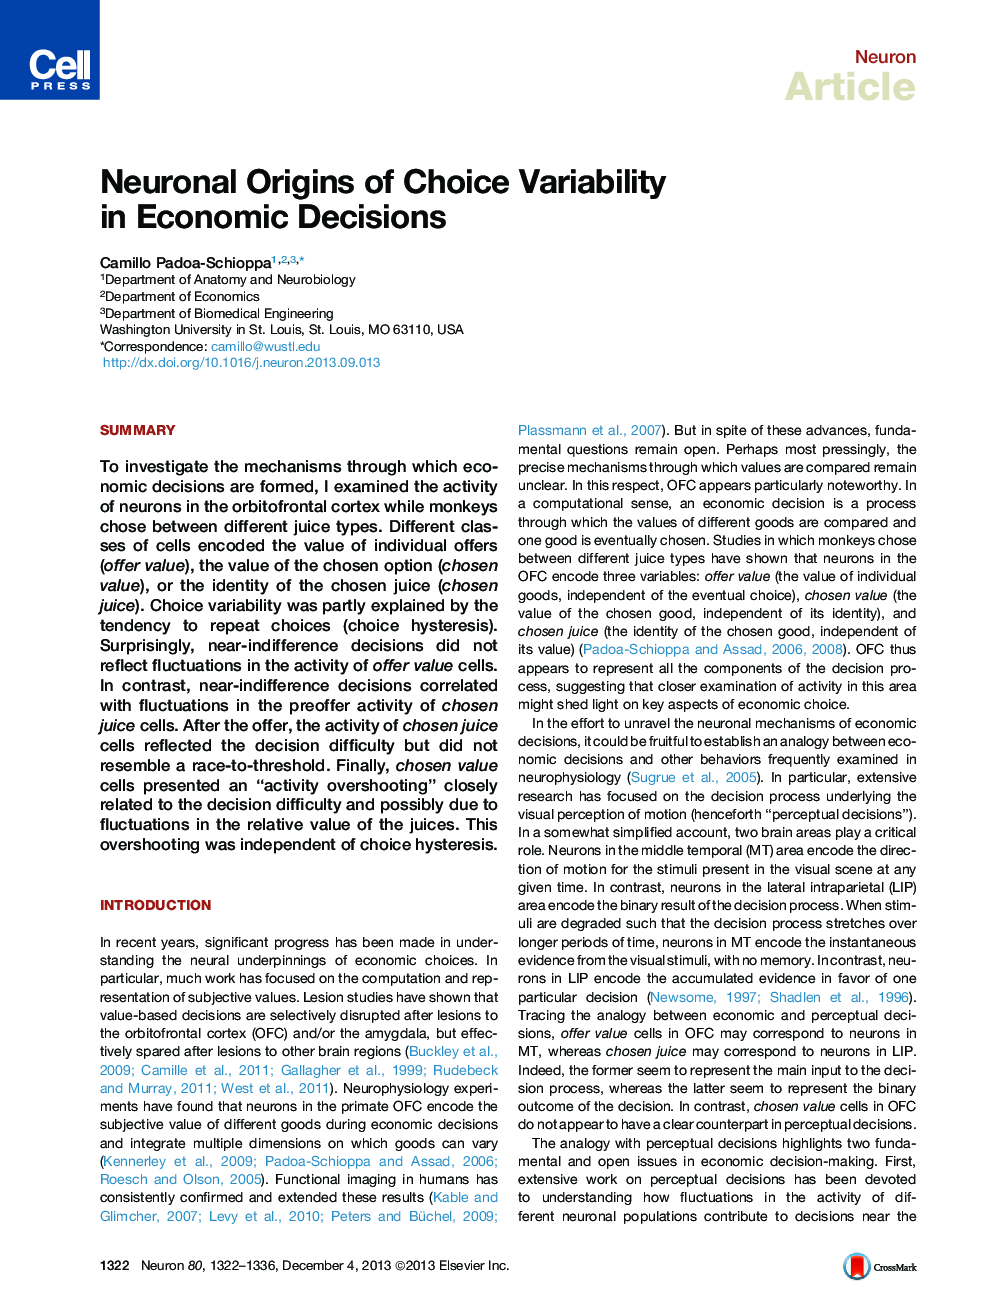 Neuronal Origins of Choice Variability in Economic Decisions